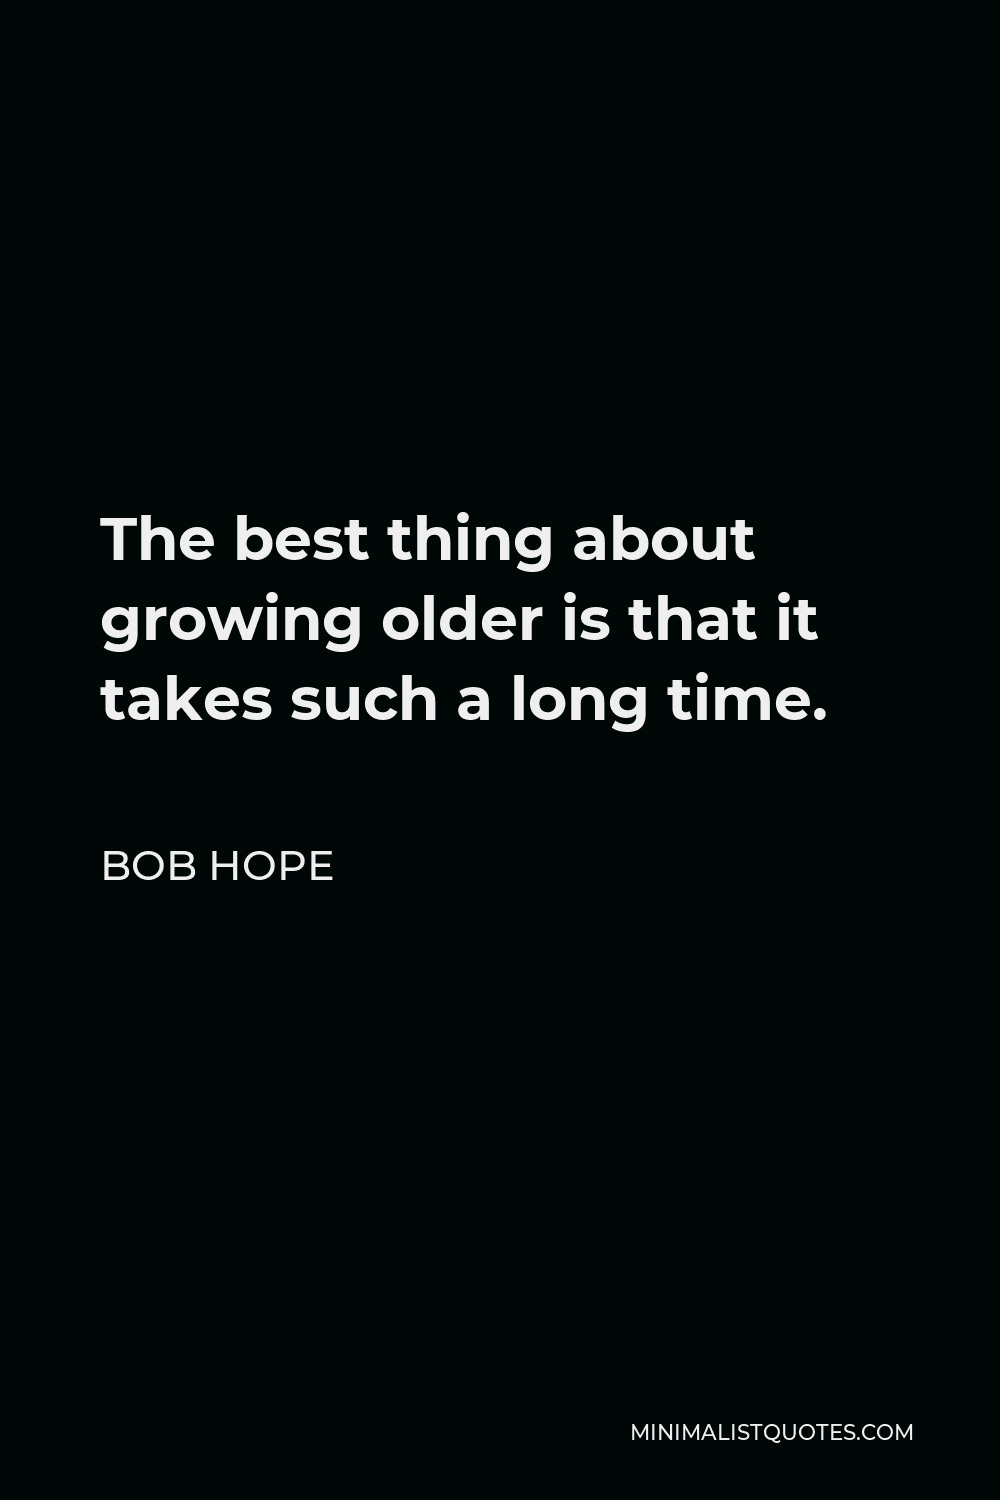 Bob Hope Quote - The best thing about growing older is that it takes such a long time.